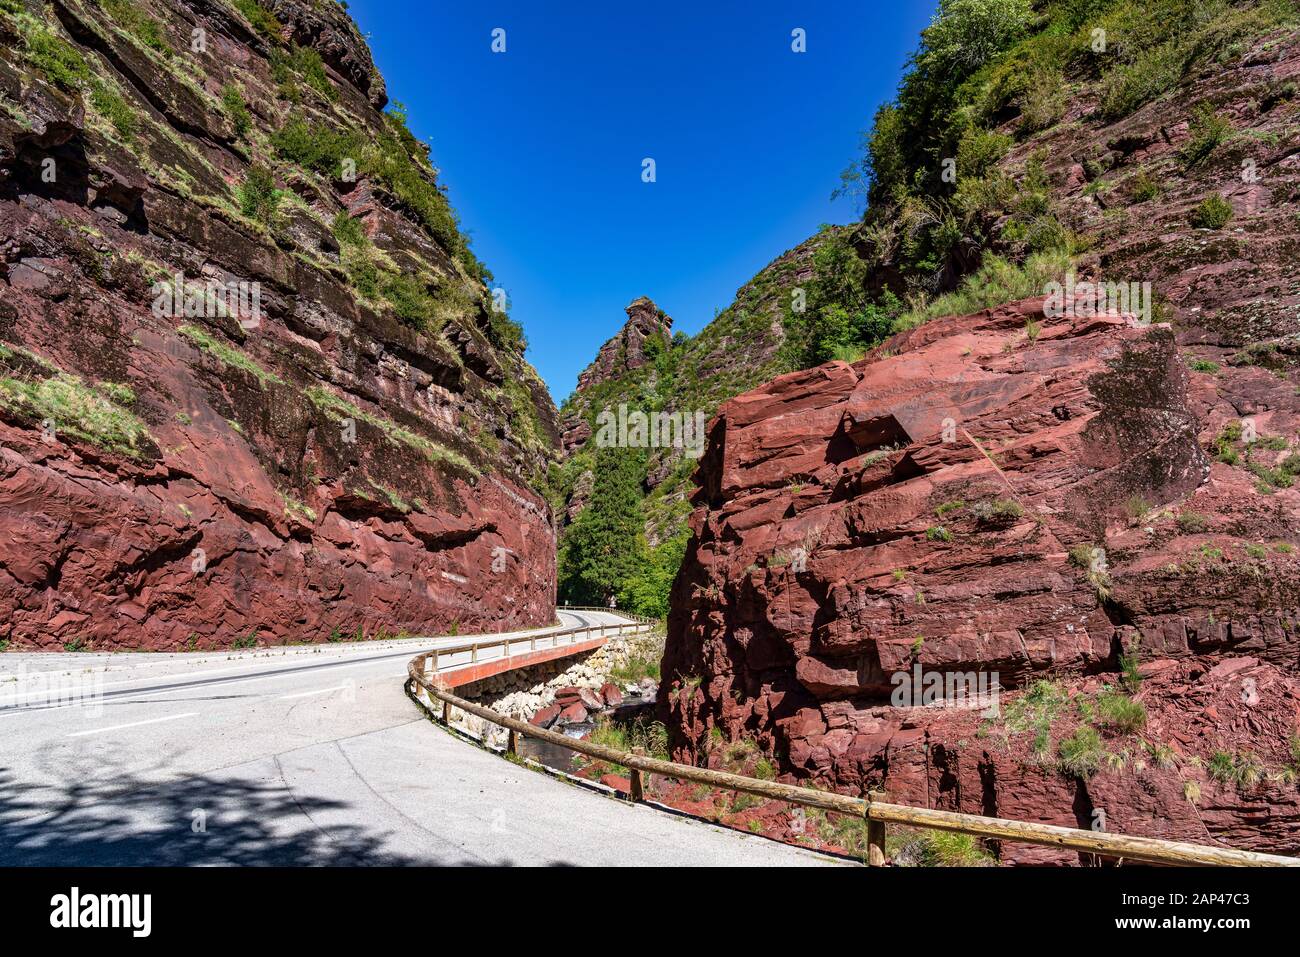 The Gorges du Cians, famous canyon in Alpes-Maritimes, France Stock Photo